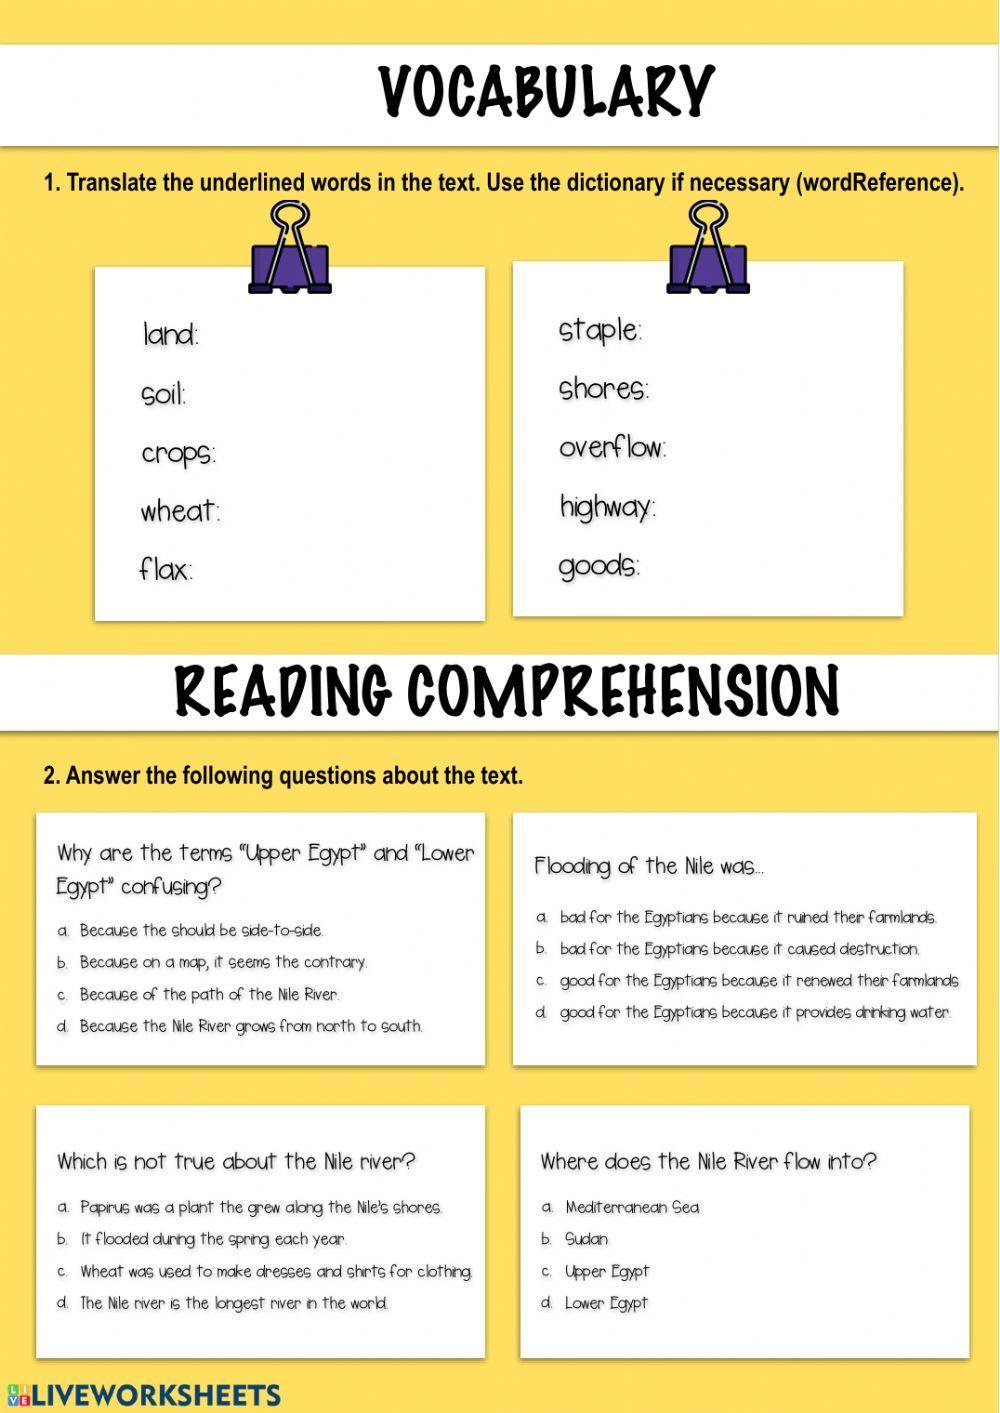 The Nile river: reading comprehension